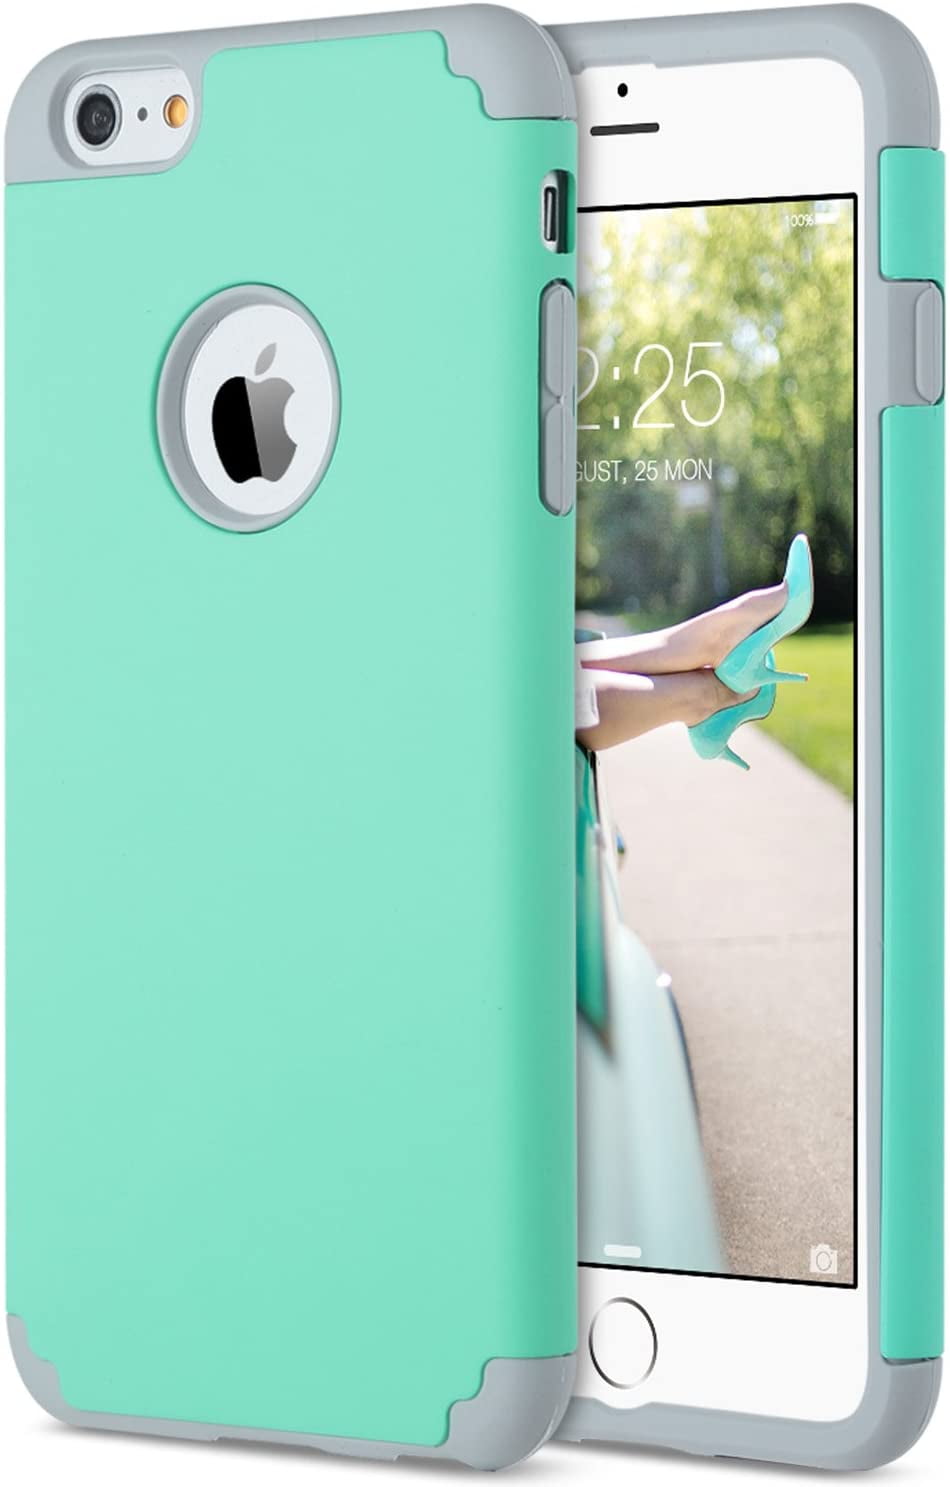 iPhone Plus Case, iPhone 6S Case,ULAK Slim Protective Hybrid Silicone Hard Back Cover Scratch Bumper Case for iPhone 6/6s Plus, Turquoise - Walmart.com